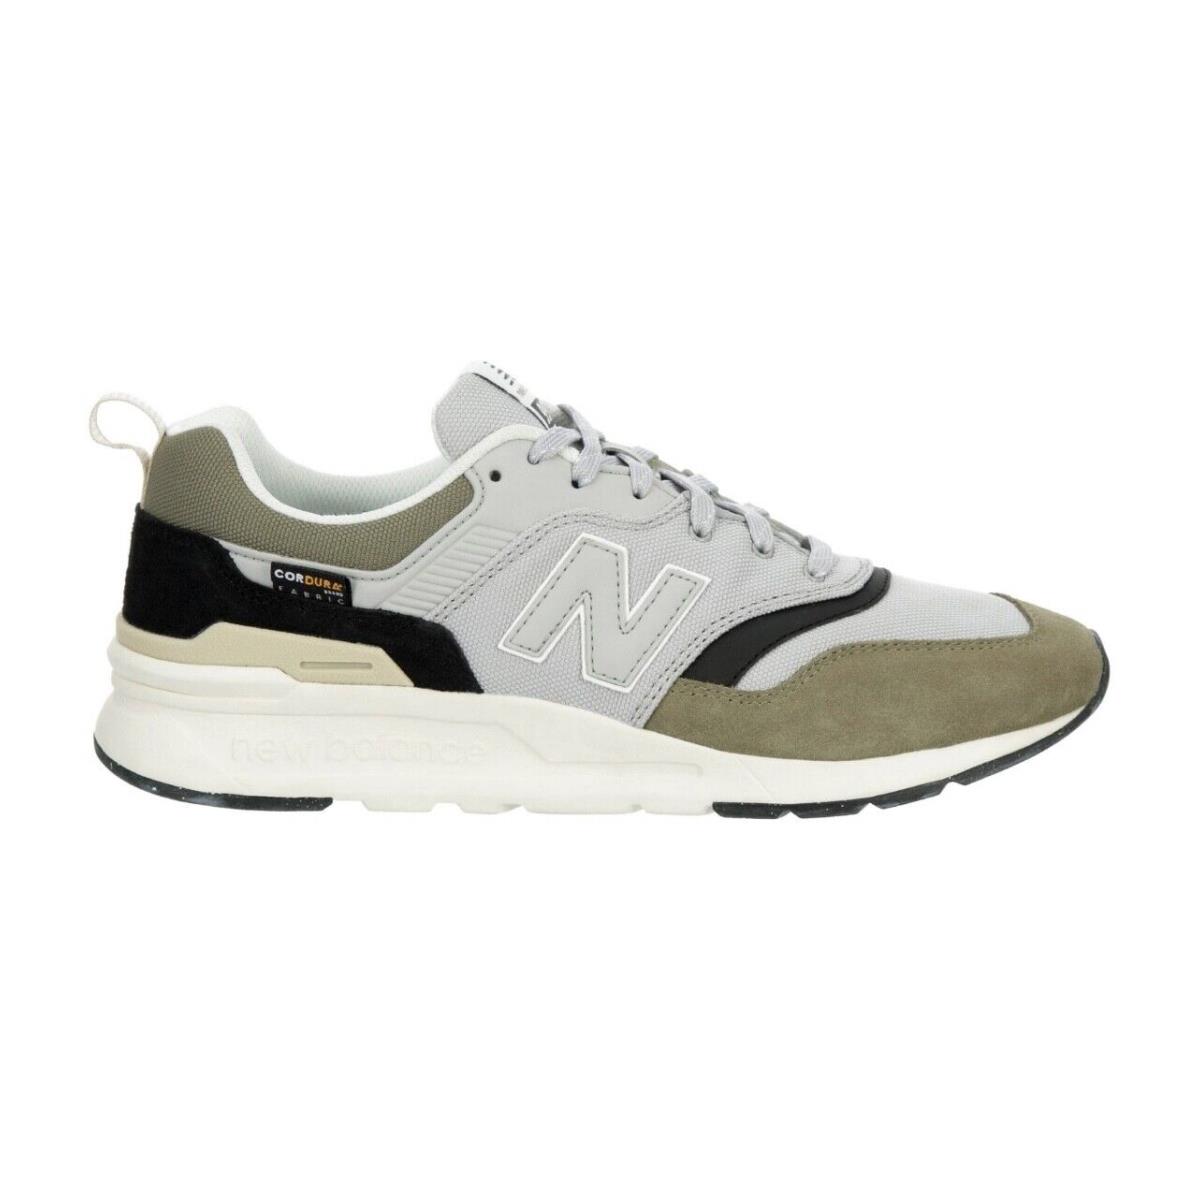 New Balance 997H Cordura Men`s Suede Athletic Running Casual Fashion Shoes Olive/Light Gray